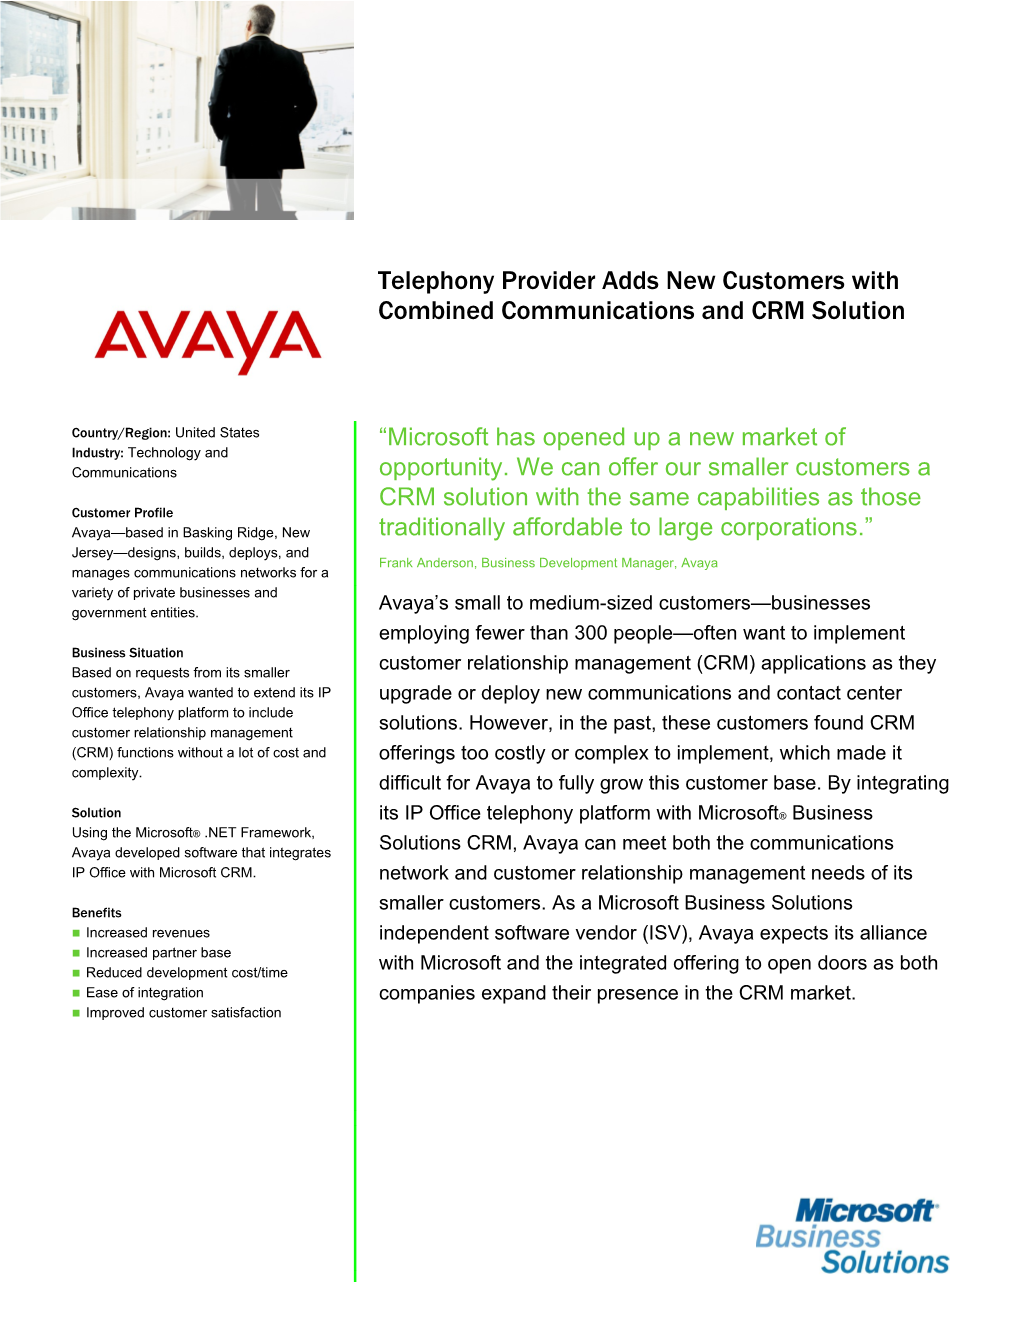 Telephony Provider Adds New Customers with Combined Communications and CRM Solution